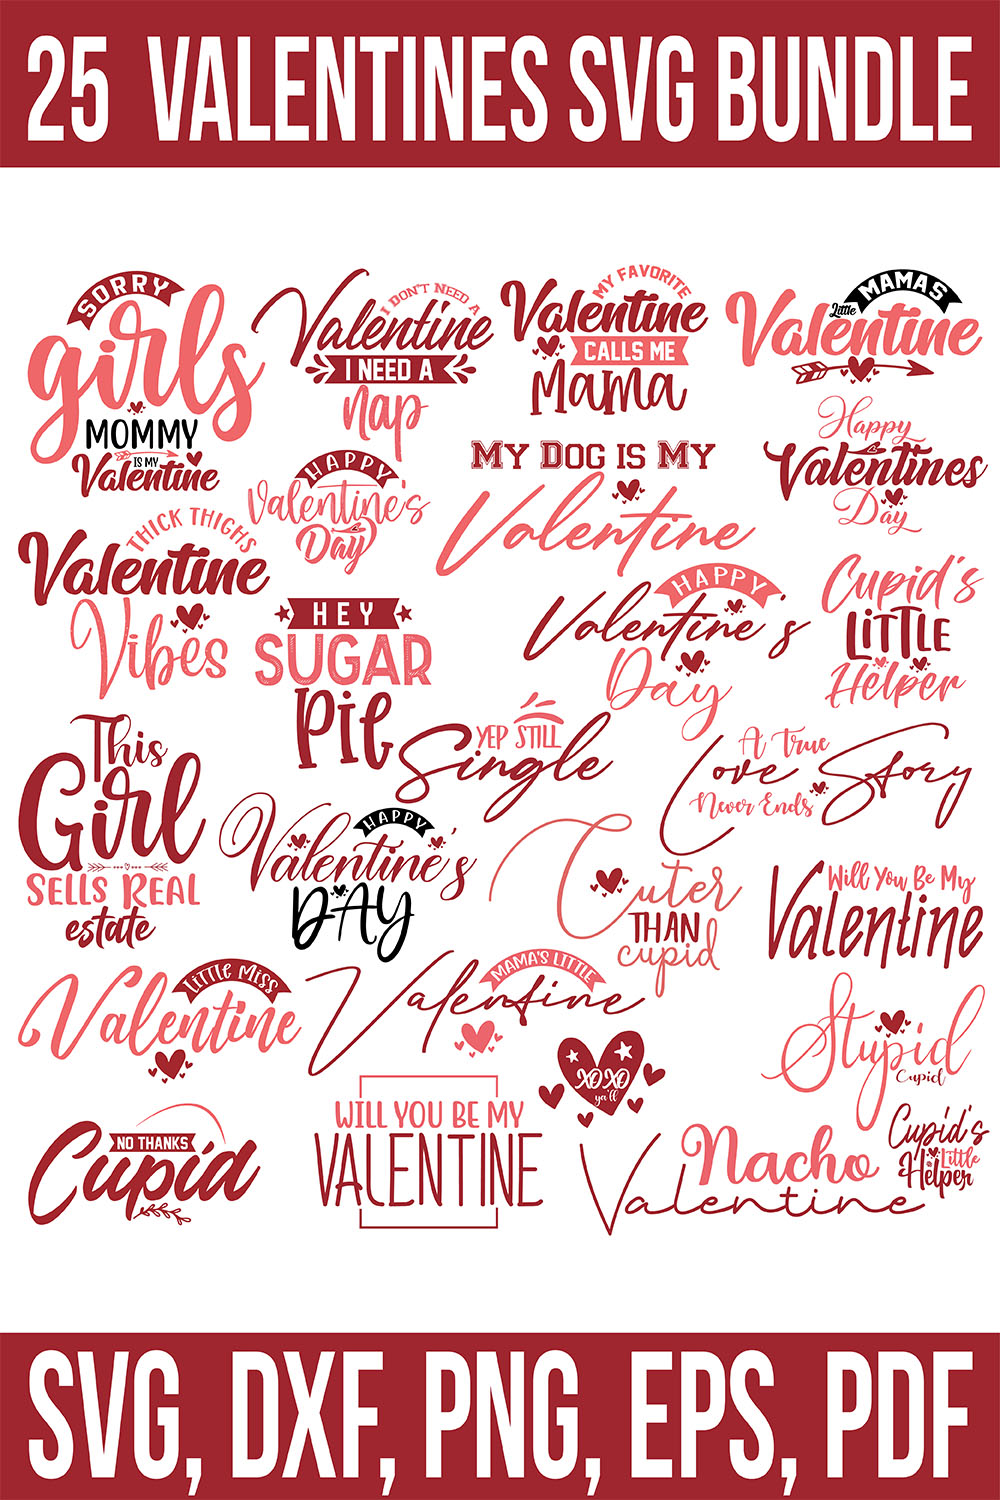 A collection of wonderful images for prints on the theme of Valentines Day